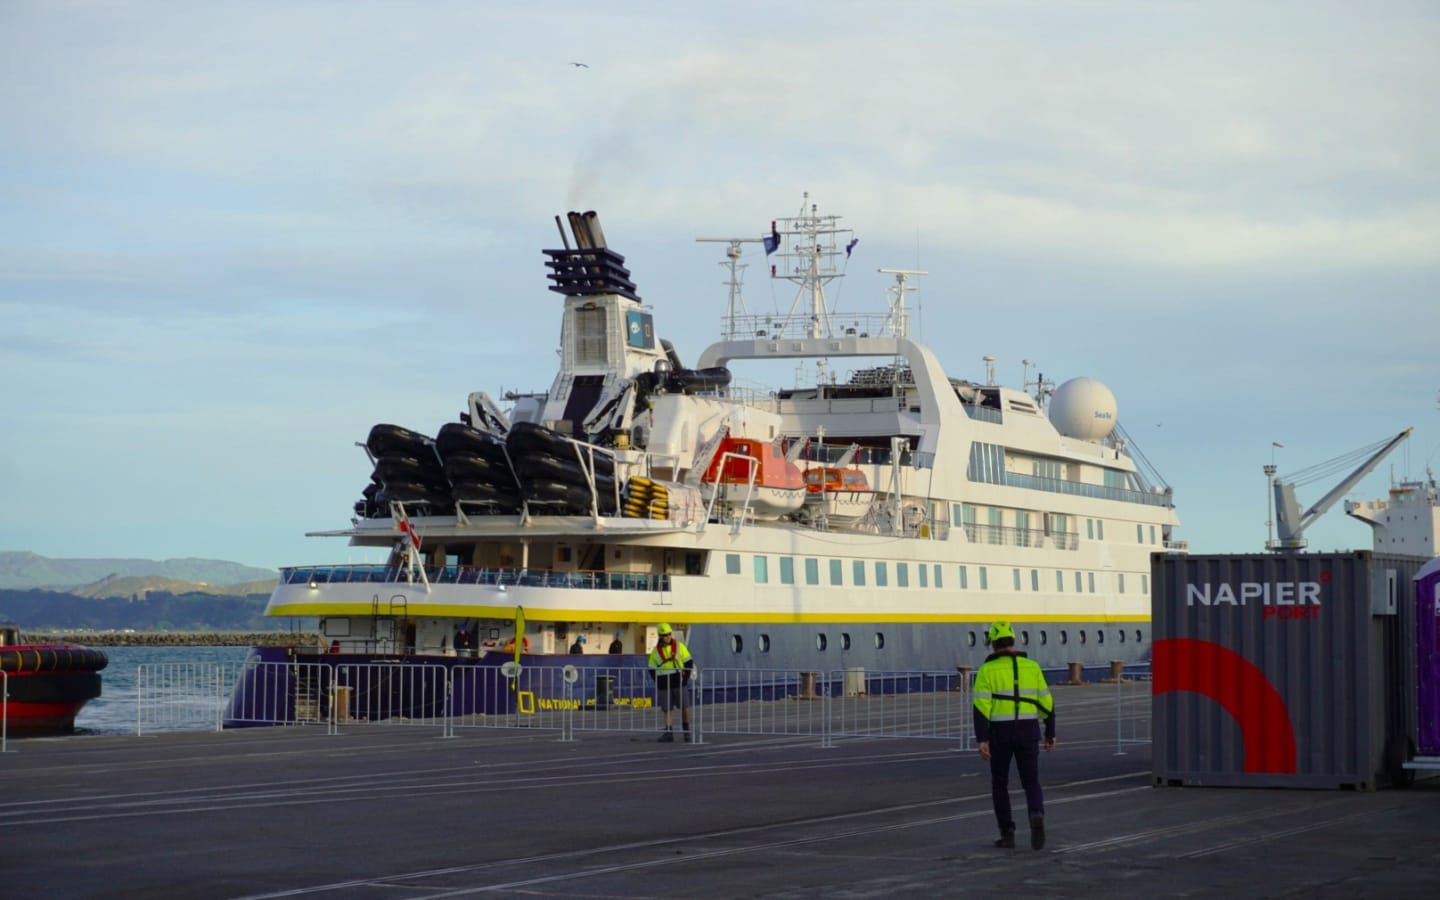 The National Geographic Orion berths at Napier Port.